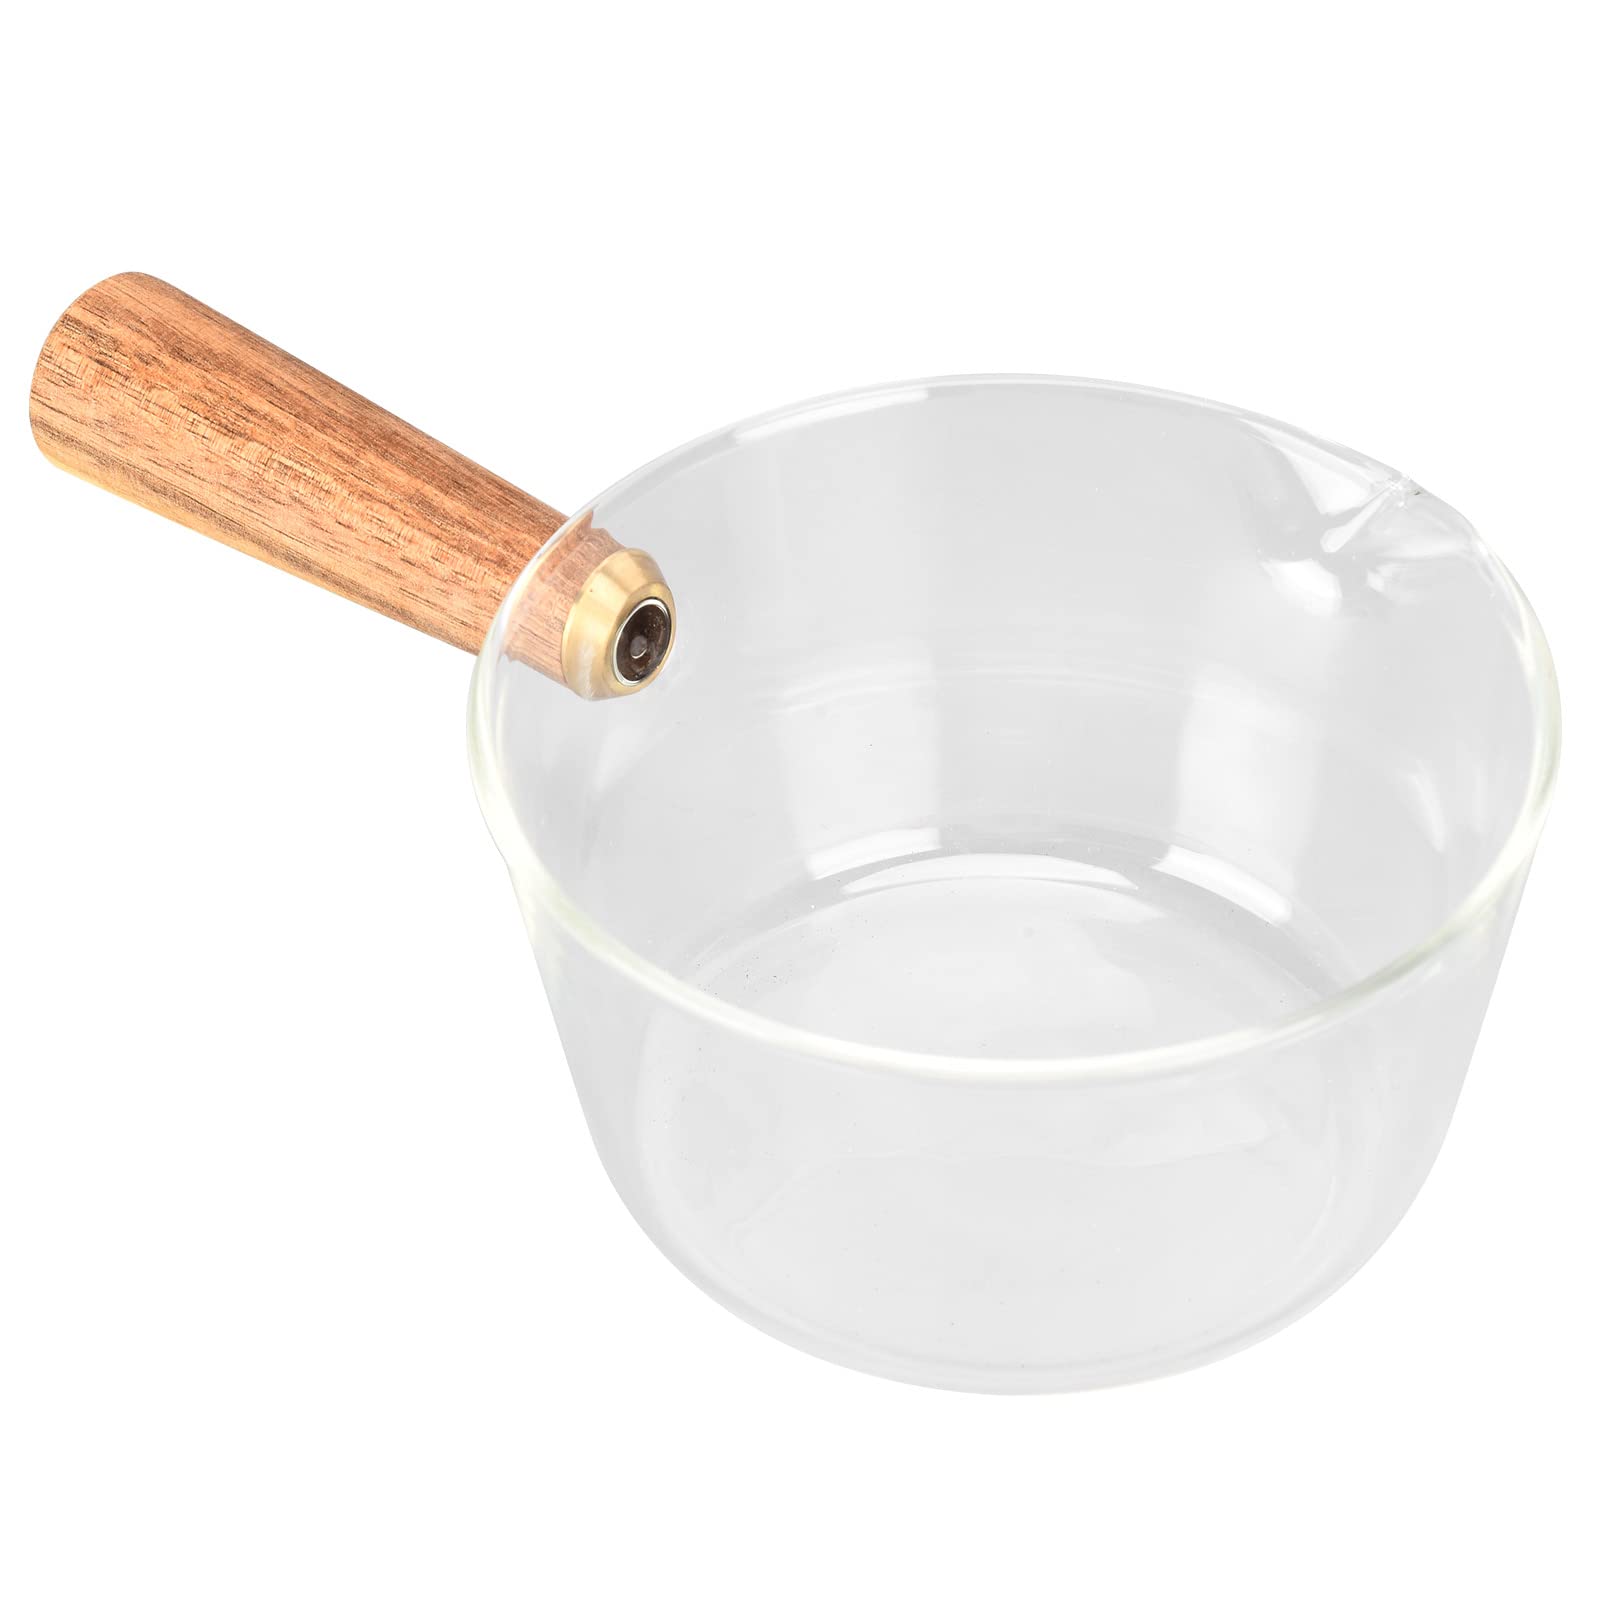 Noodle Pot Clear Glass Pot Milk Pan With Wooden Handle Borosilicate Glass Nonstick Saucepan Glass Measuring Cups Frothing Pitcher for Kitchen Restaurant Glass Pan(400ml)